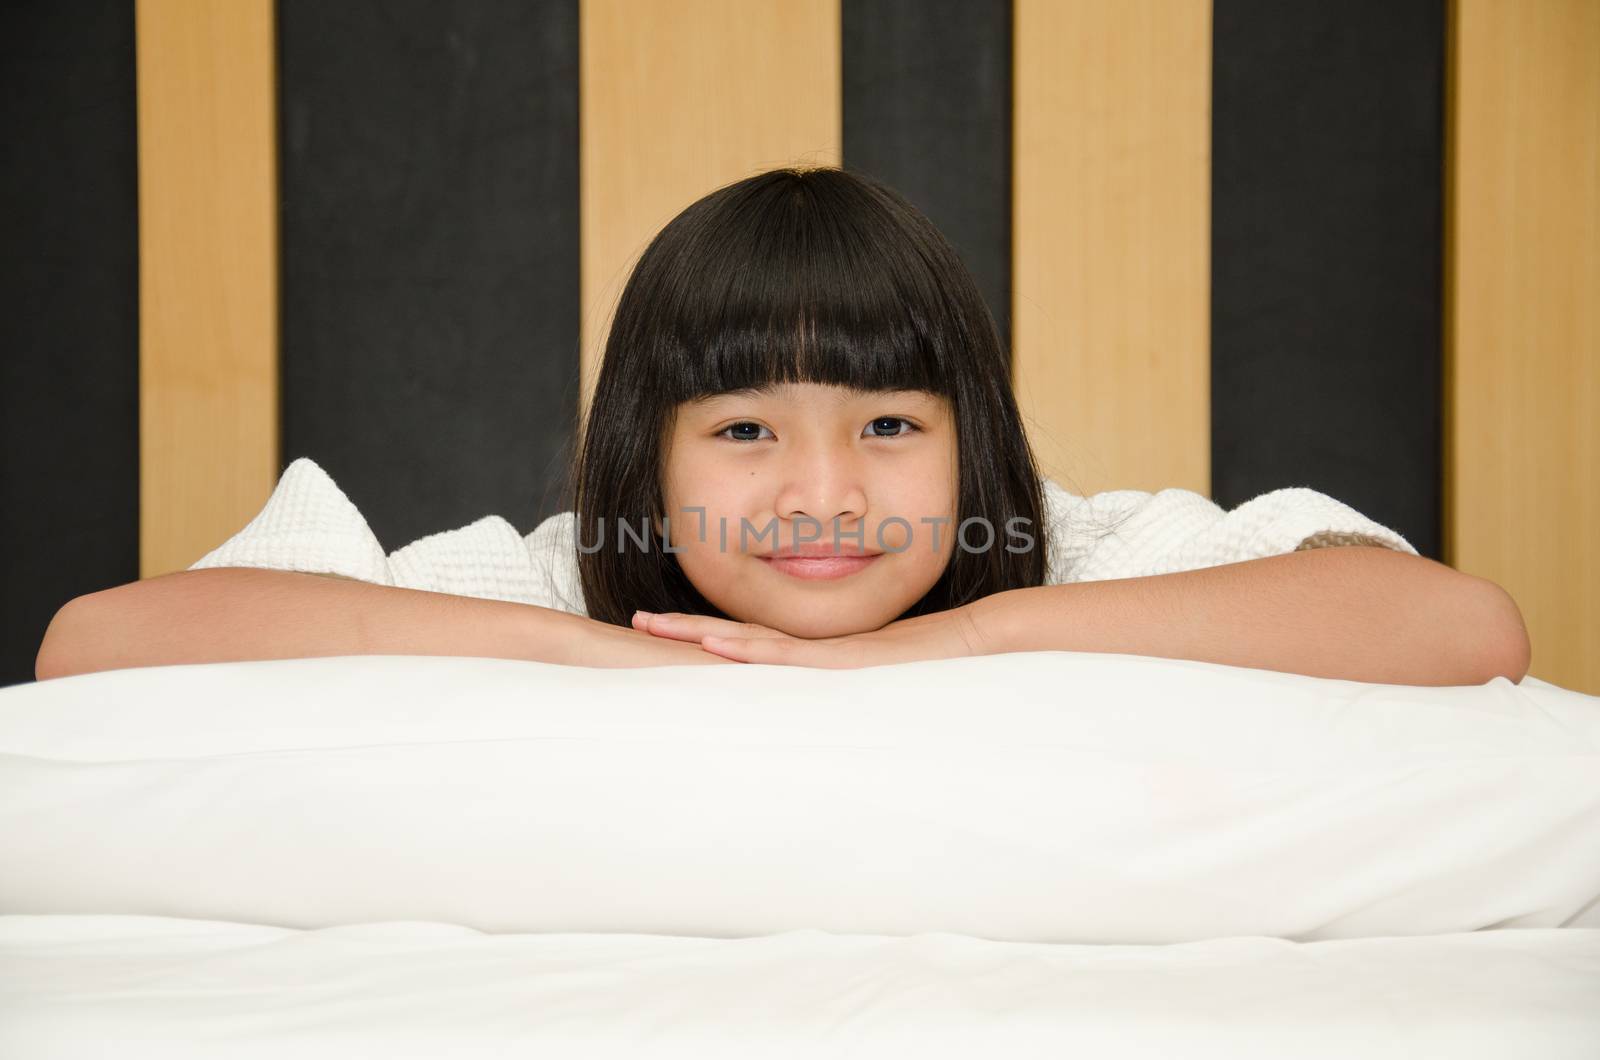 Adorable little asia girl waked up in her bed.